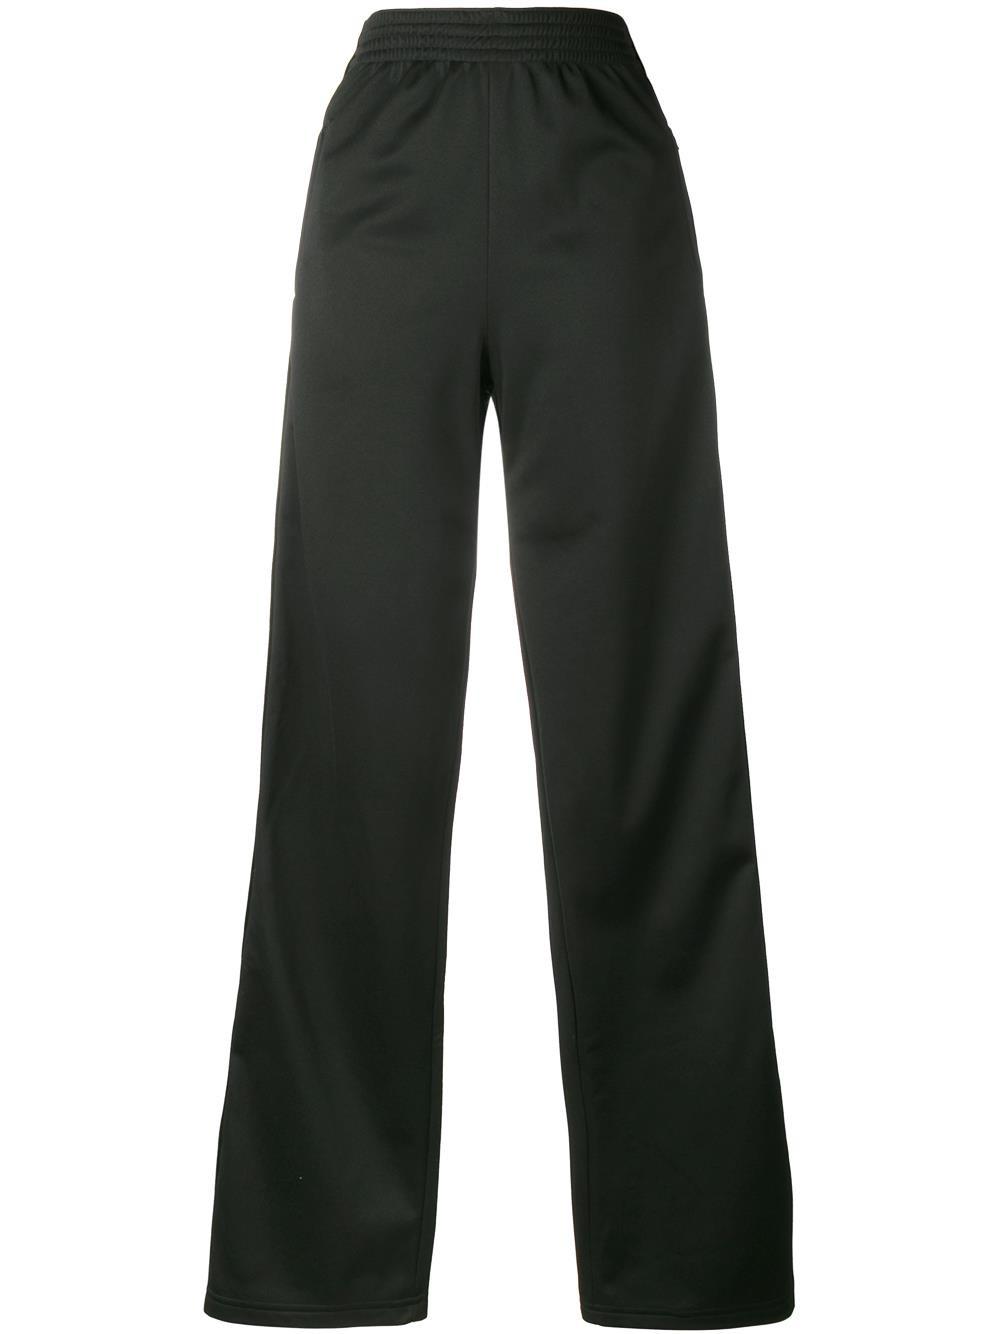 Lyst - Givenchy Tech Fabric Trousers